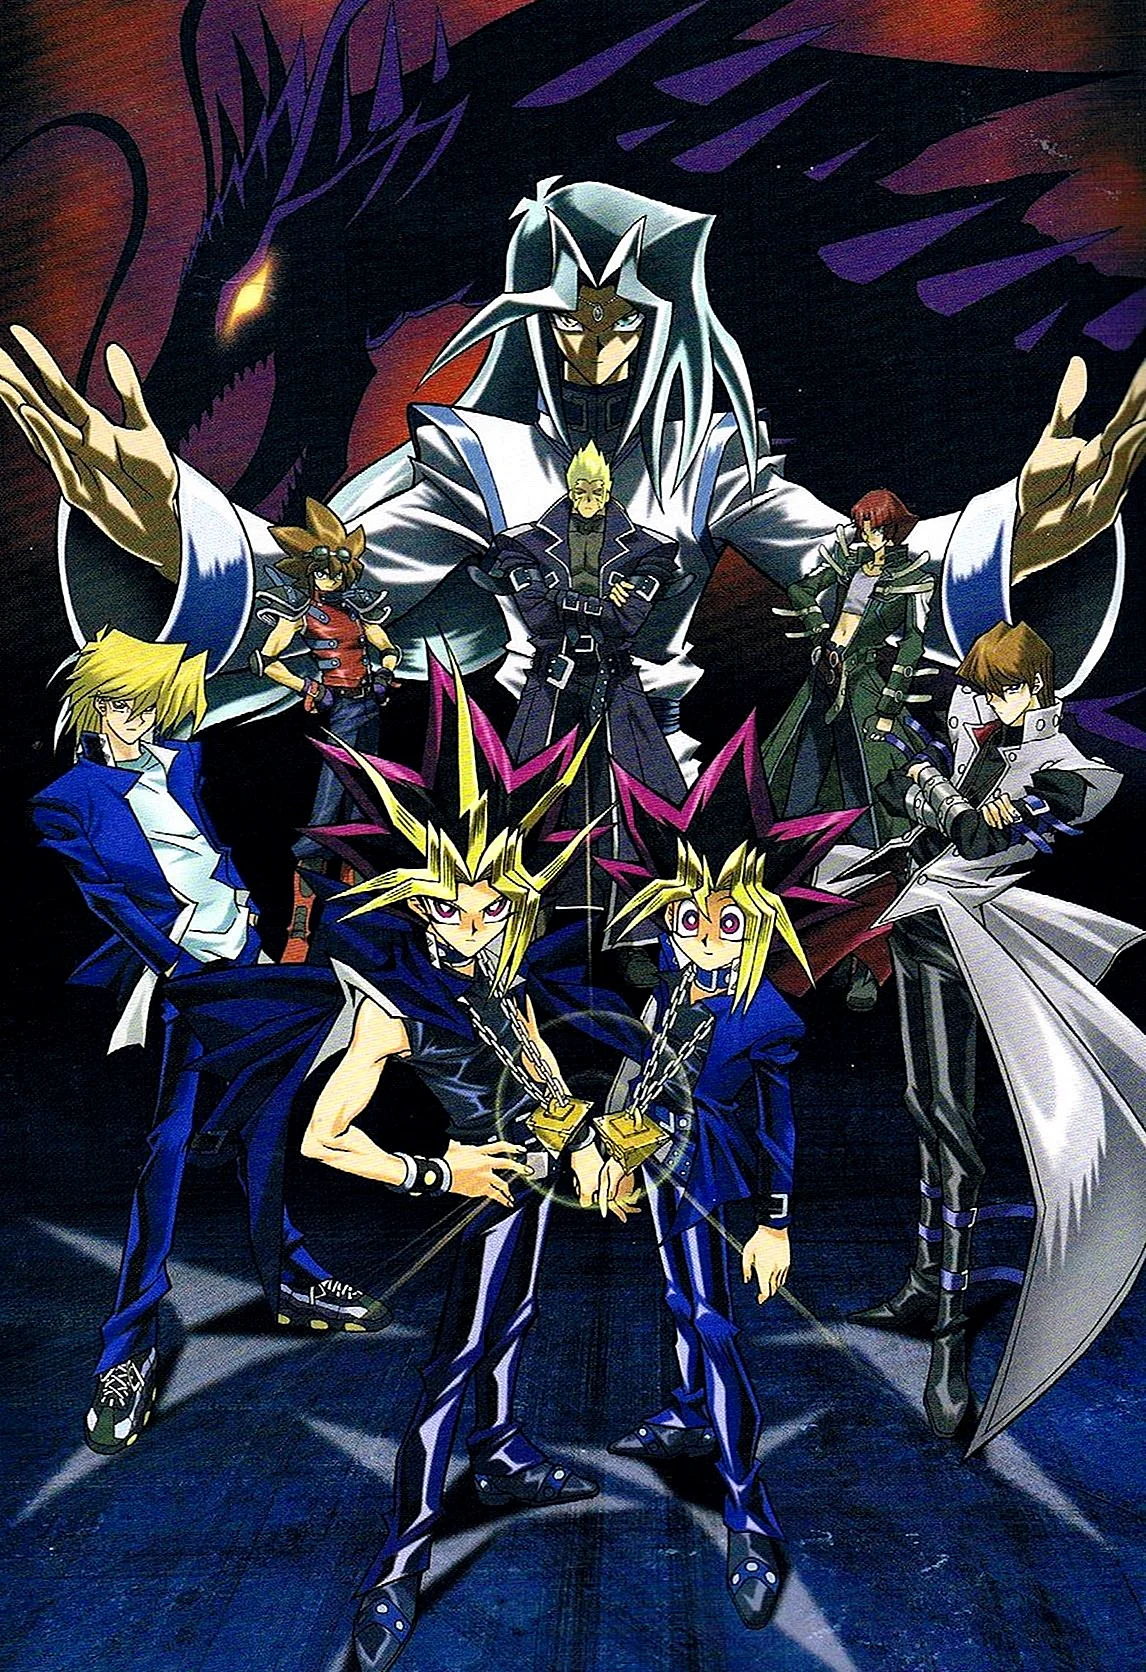 Yu-Gi-Oh Duel Monsters Wallpaper For iPhone